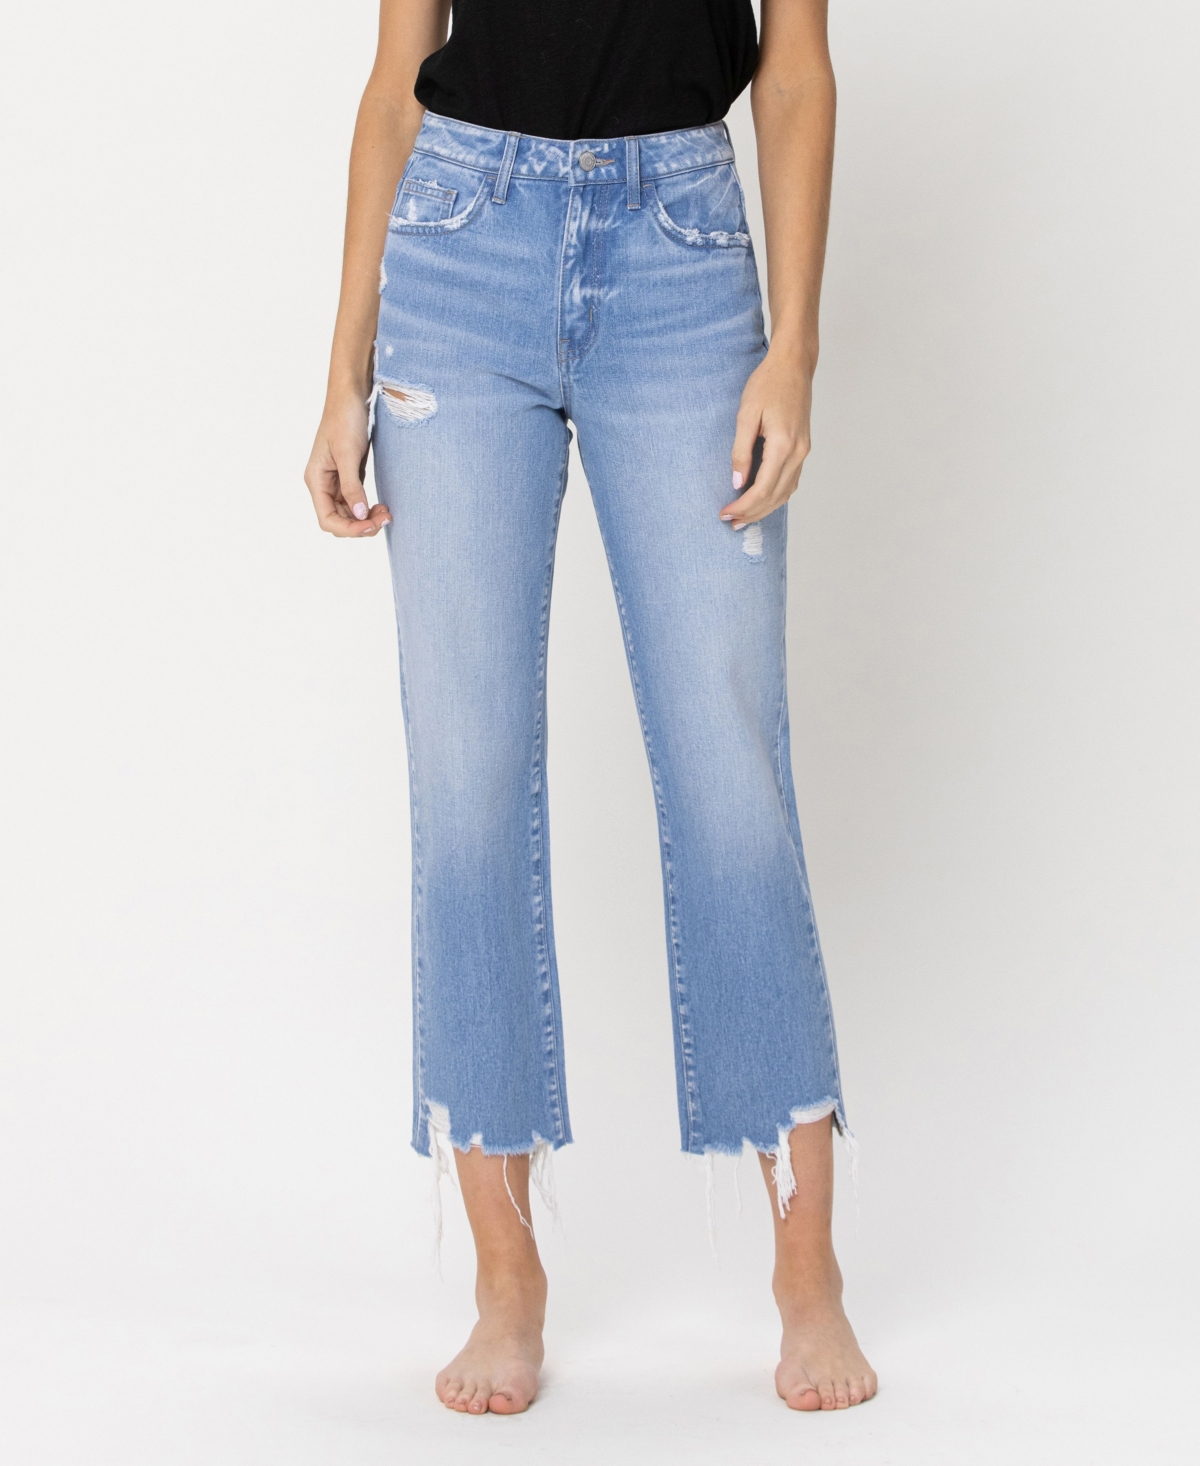 Flying Monkey Women's High Rise Vintage-Like Straight Crop Jeans with Distressed Hem